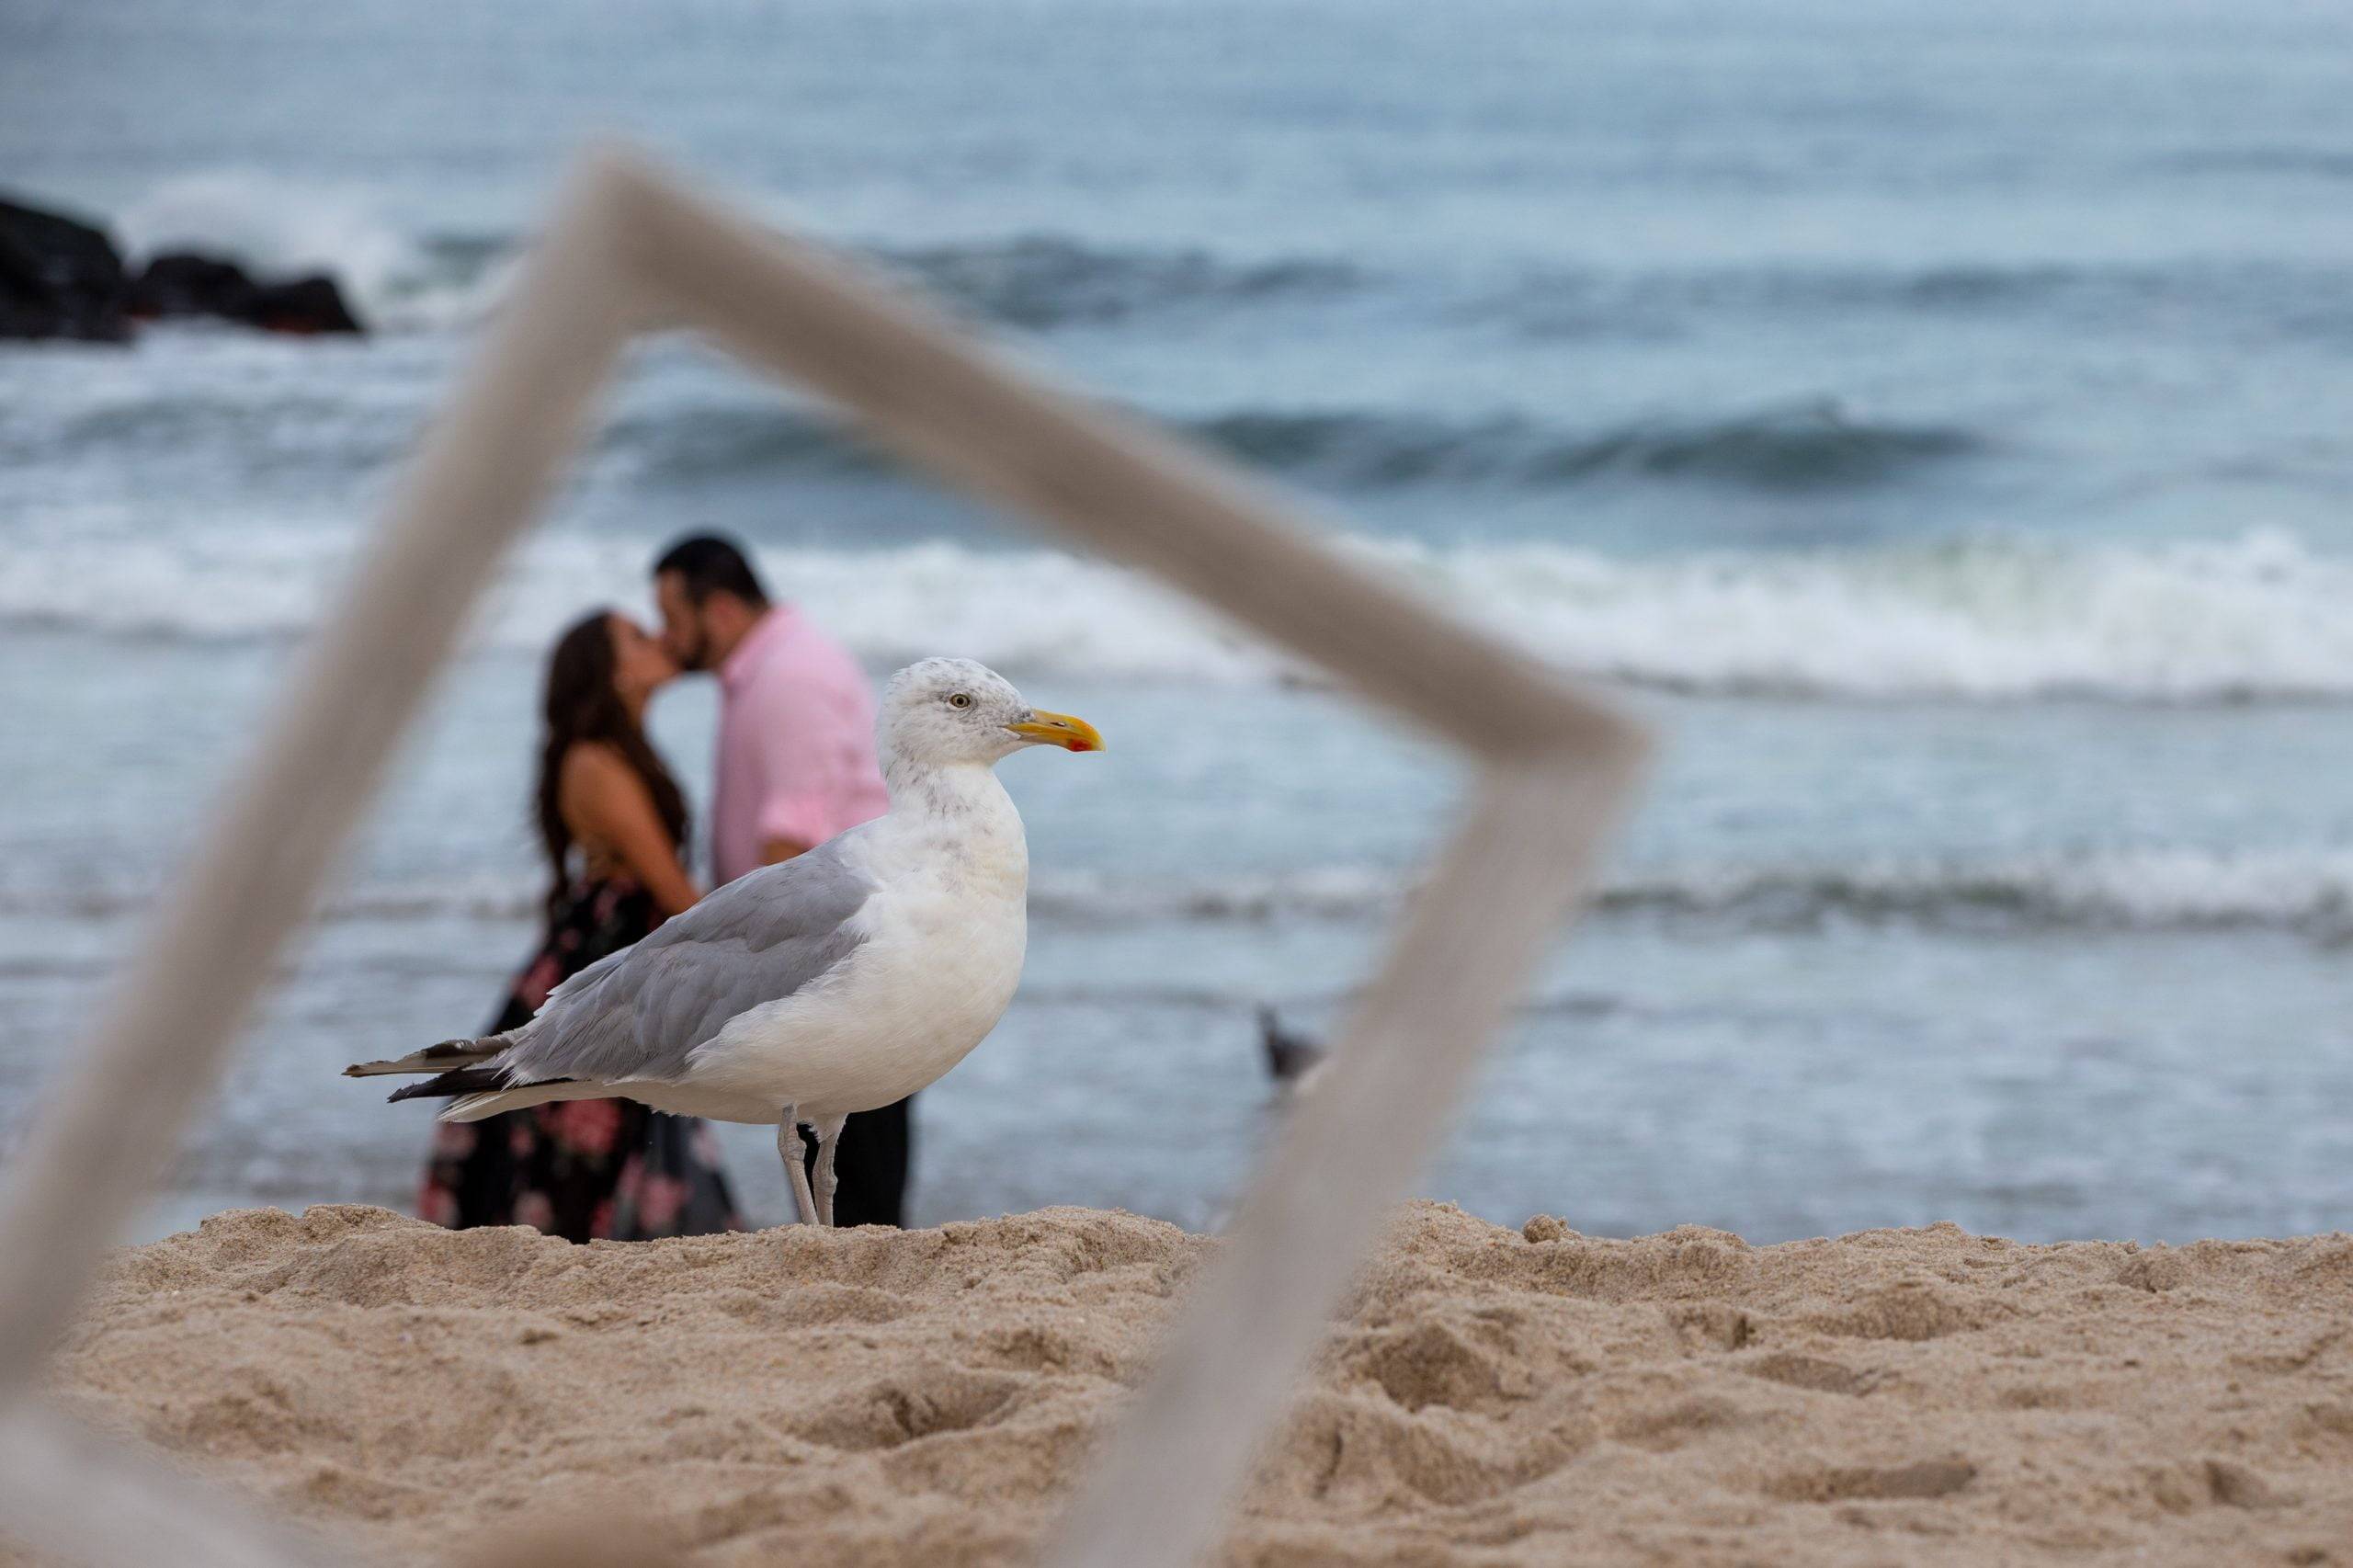 A seagull is standing on the sand next to a couple.